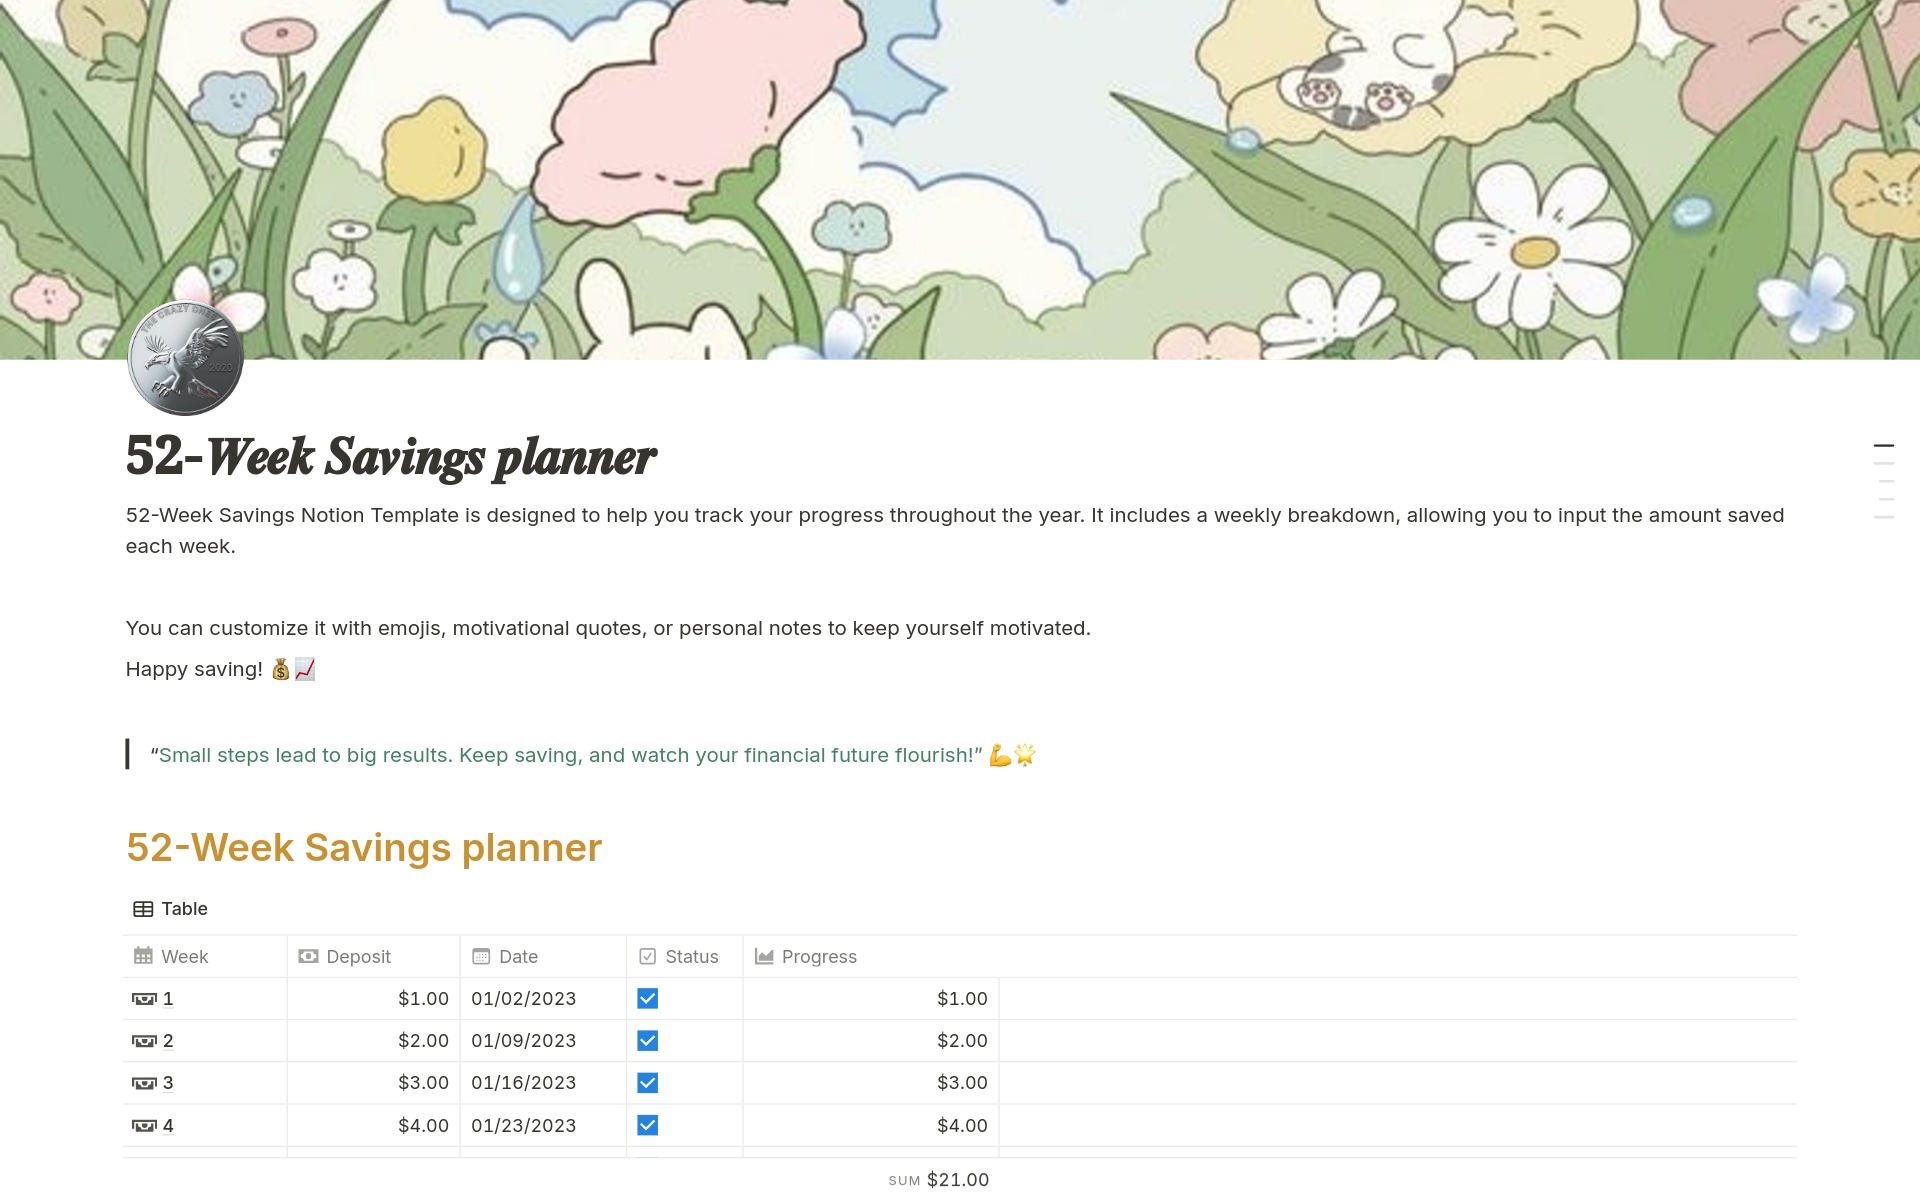 Achieve your savings goals effortlessly with the 52-Week Savings Planner Notion Template. This practical tool is perfect for building a consistent savings habit over a year. Ideal for personal finance, budgeting, and long-term financial planning. Start saving systematically.